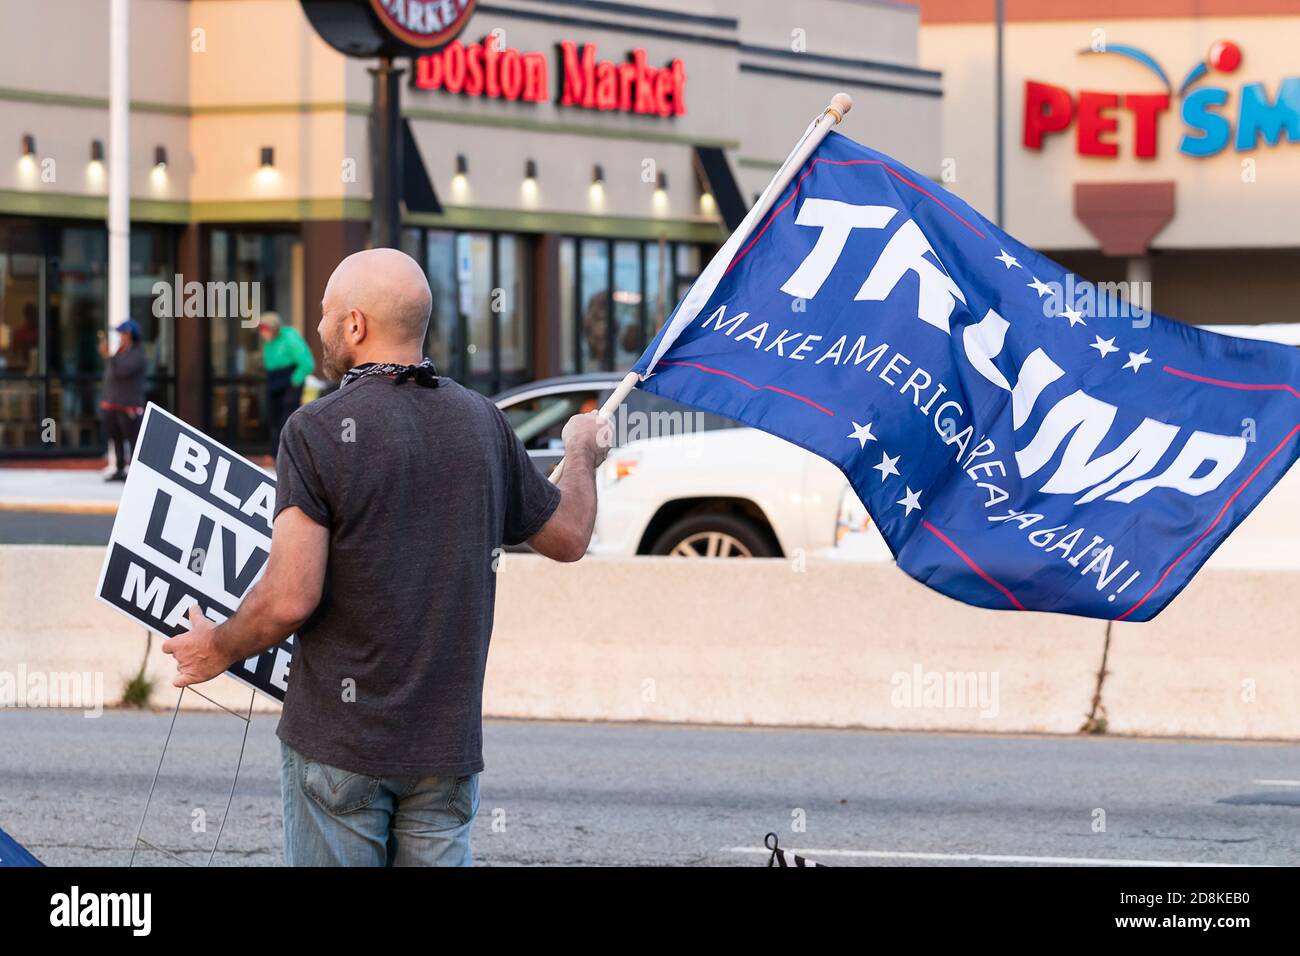 Donald Trump supporter holding 'Black Lives Matter' sign and 'TRUMP - Make America Great Again' flag at local sidewalk rally. Stock Photo